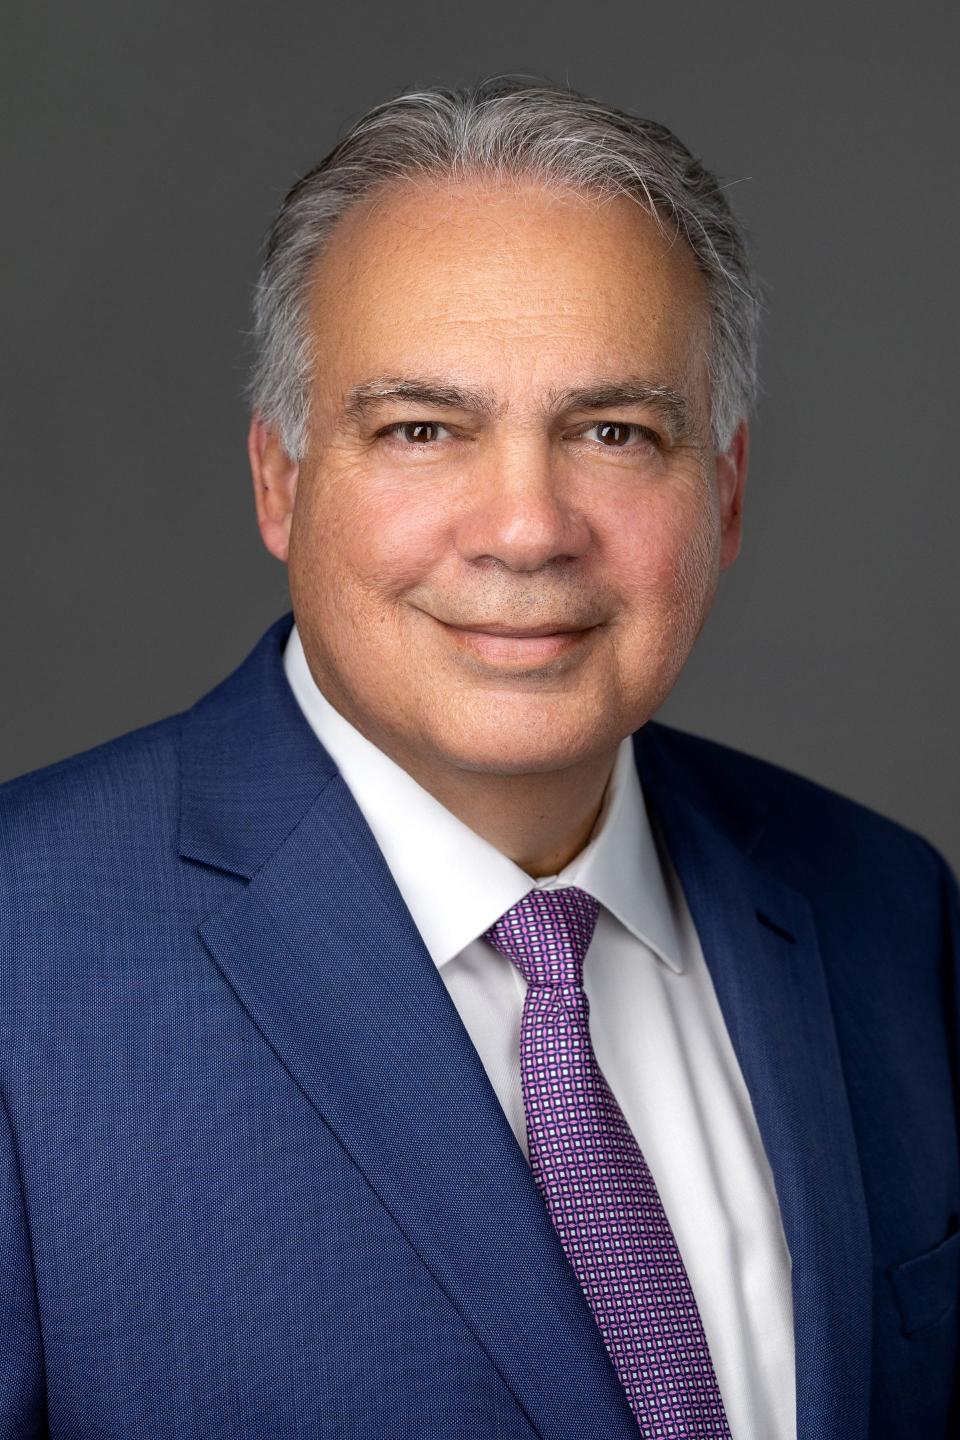 Milton Segarra became president and CEO of Discover the Palm Beaches this past fall.